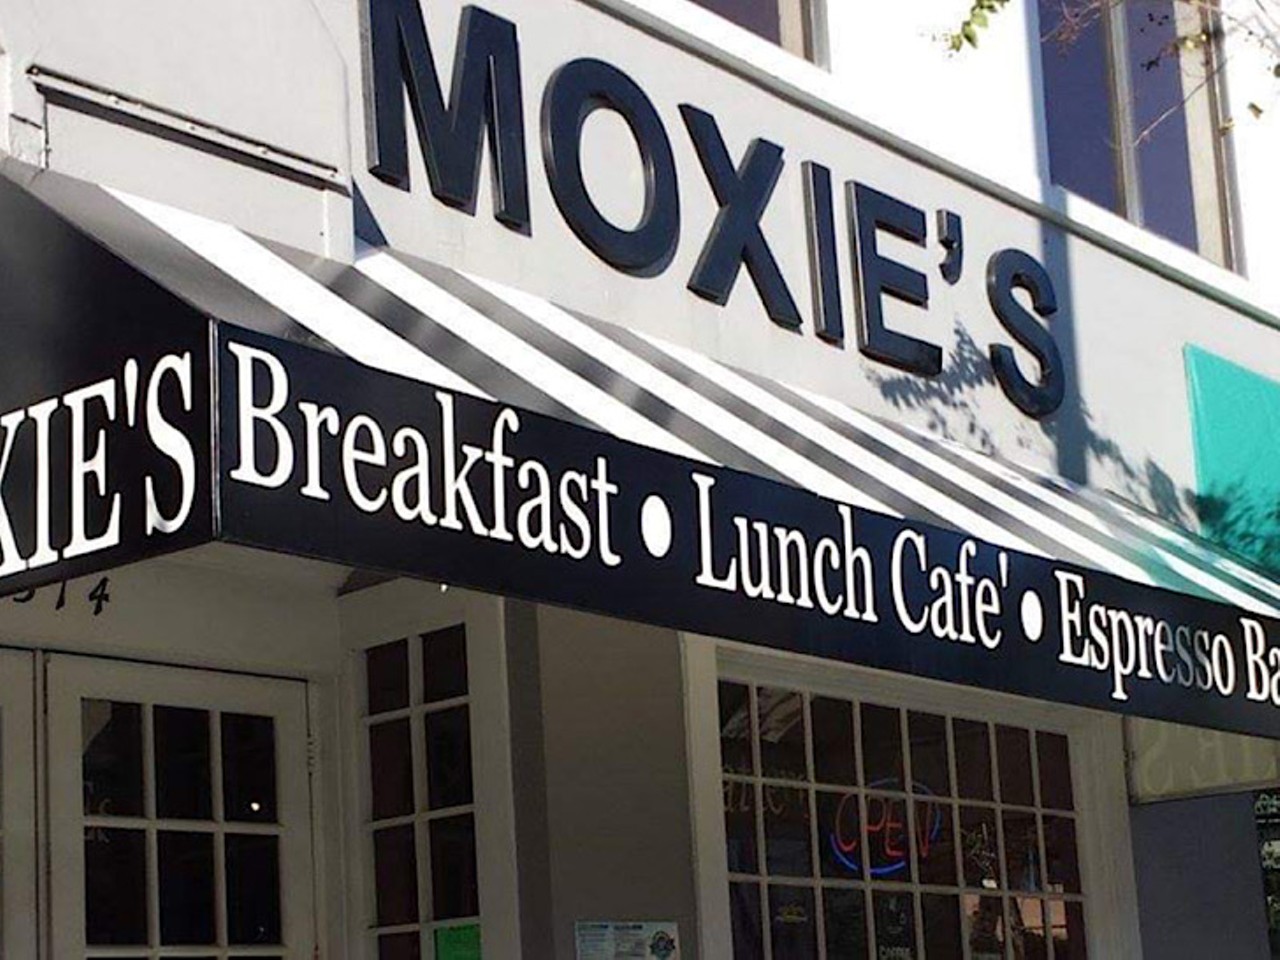 Moxie&#146;s
514 N Tampa St, Tampa, FL
Located across the street from the Curtis Hixon Waterfront Park, Moxie&#146;s features mostly sandwiches and salads for anyone walking around downtown Tampa and needing a quick bite for lunch. Beware though, it&#146;s closed on the weekends. 
Photo via Moxie&#146;s/Facebook